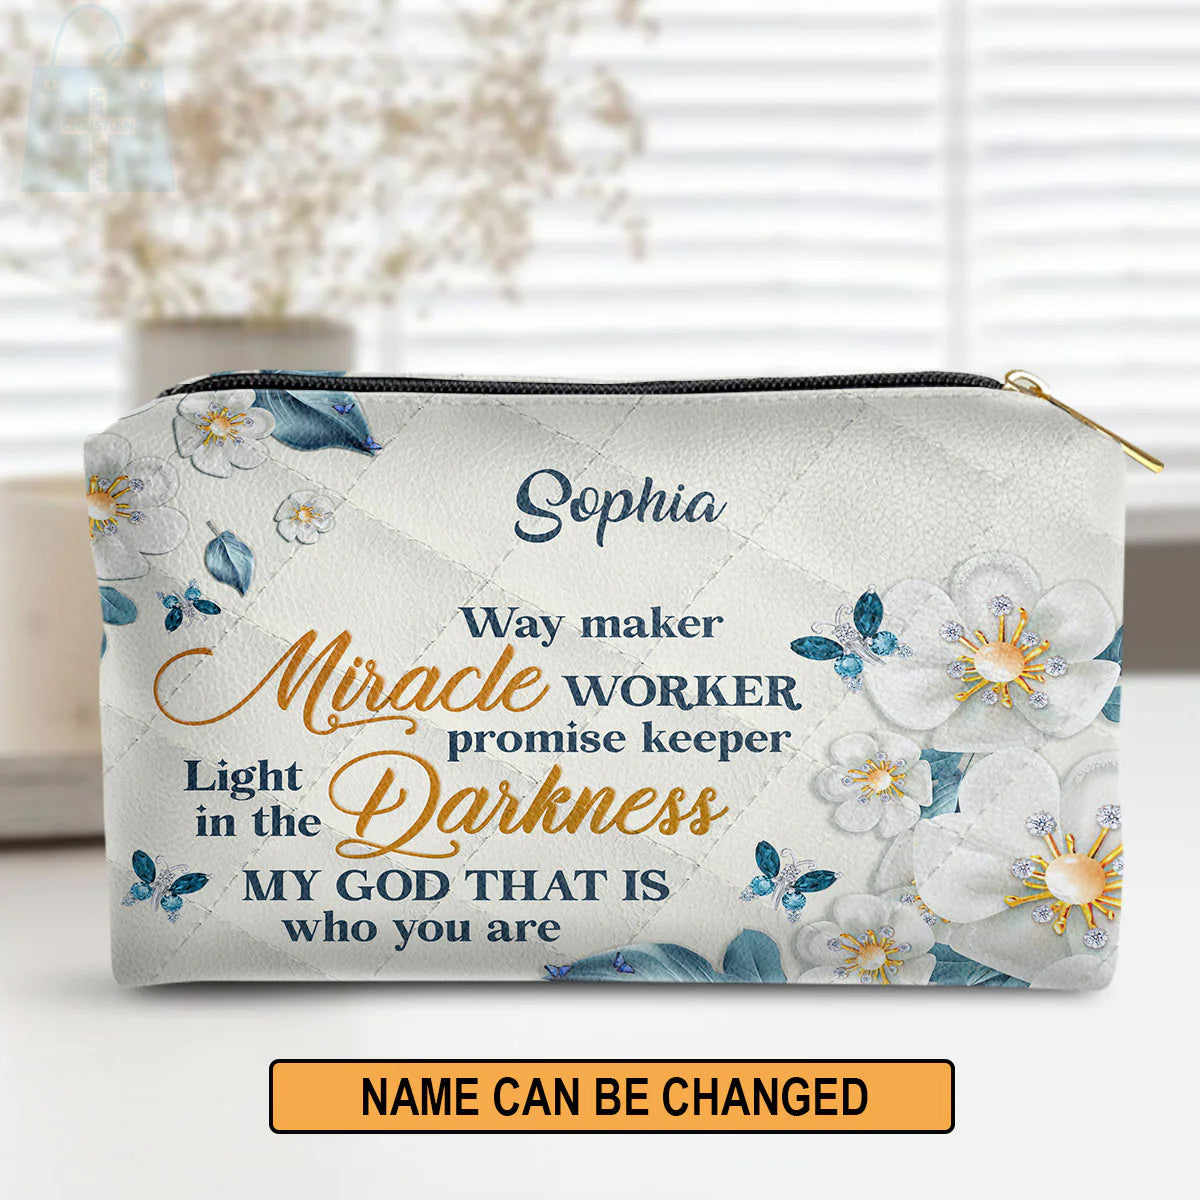 Christianartbag Makeup Cosmetic Bag, Flower & Butterfly | Way Maker And Miracle Worker, Christmas Gift, Personalized Leather Cosmetic Bag. - Christian Art Bag